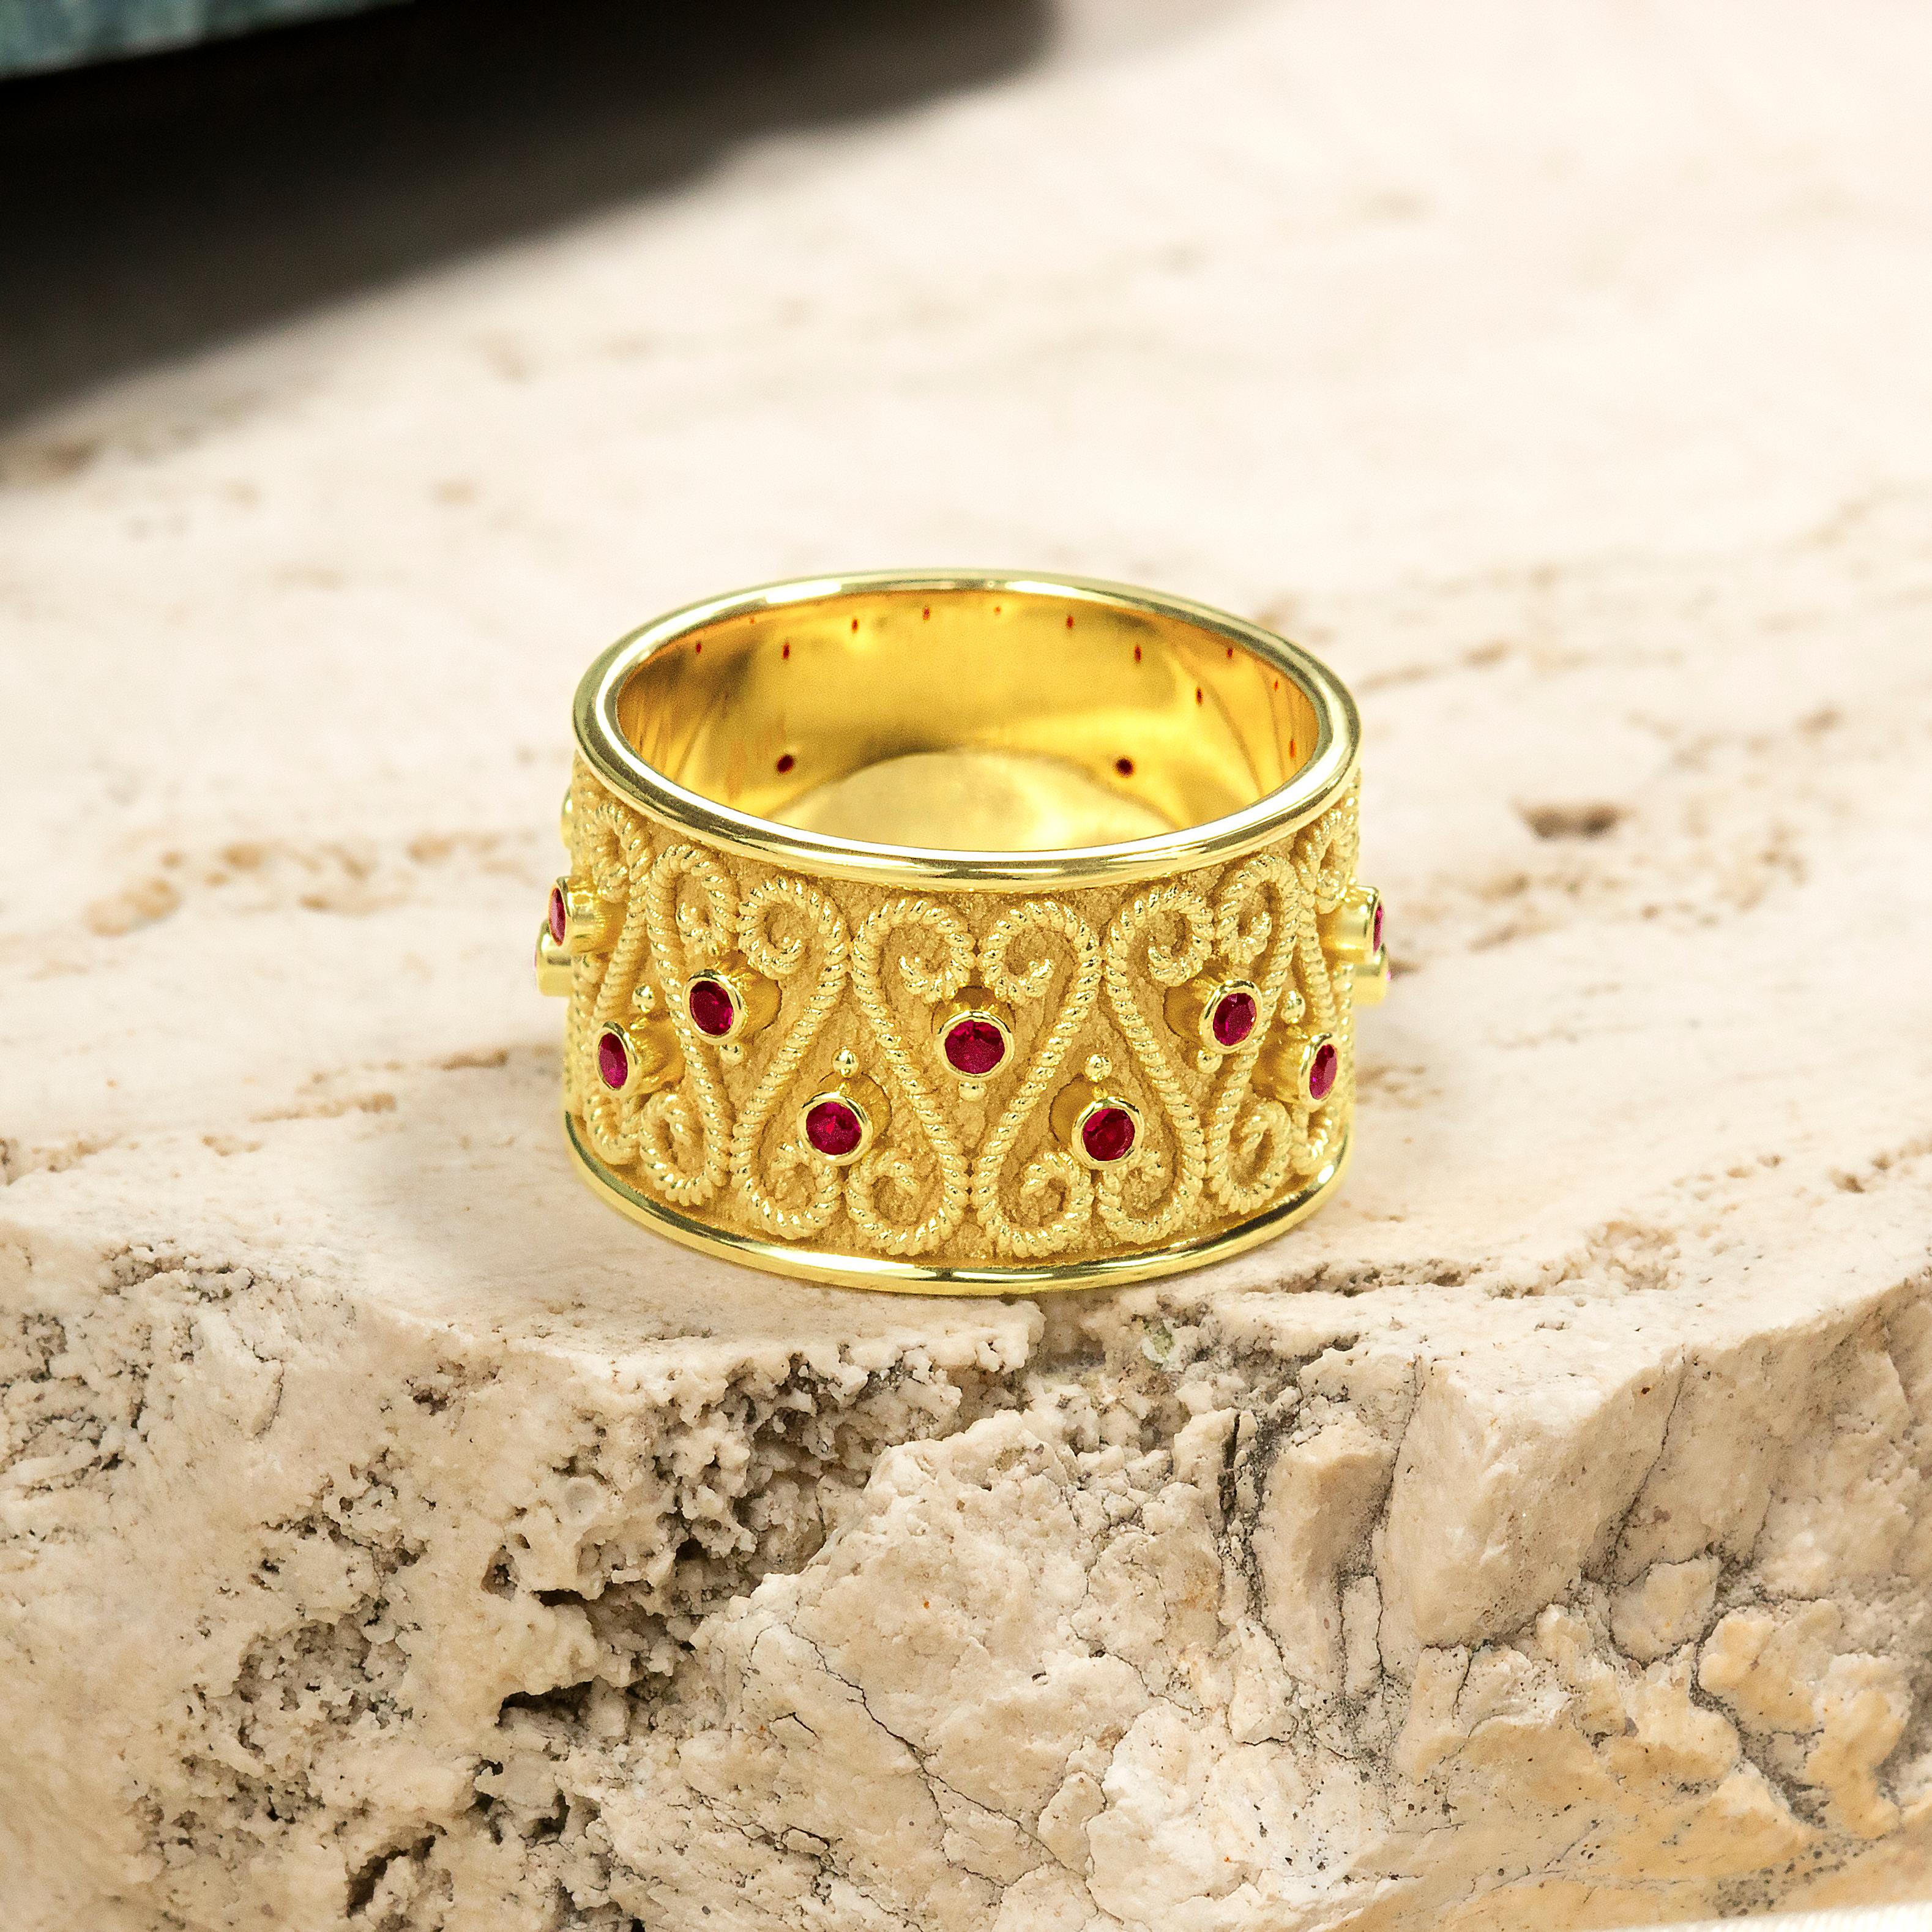 Women's 18K Gold Band Ring with Rubies For Sale